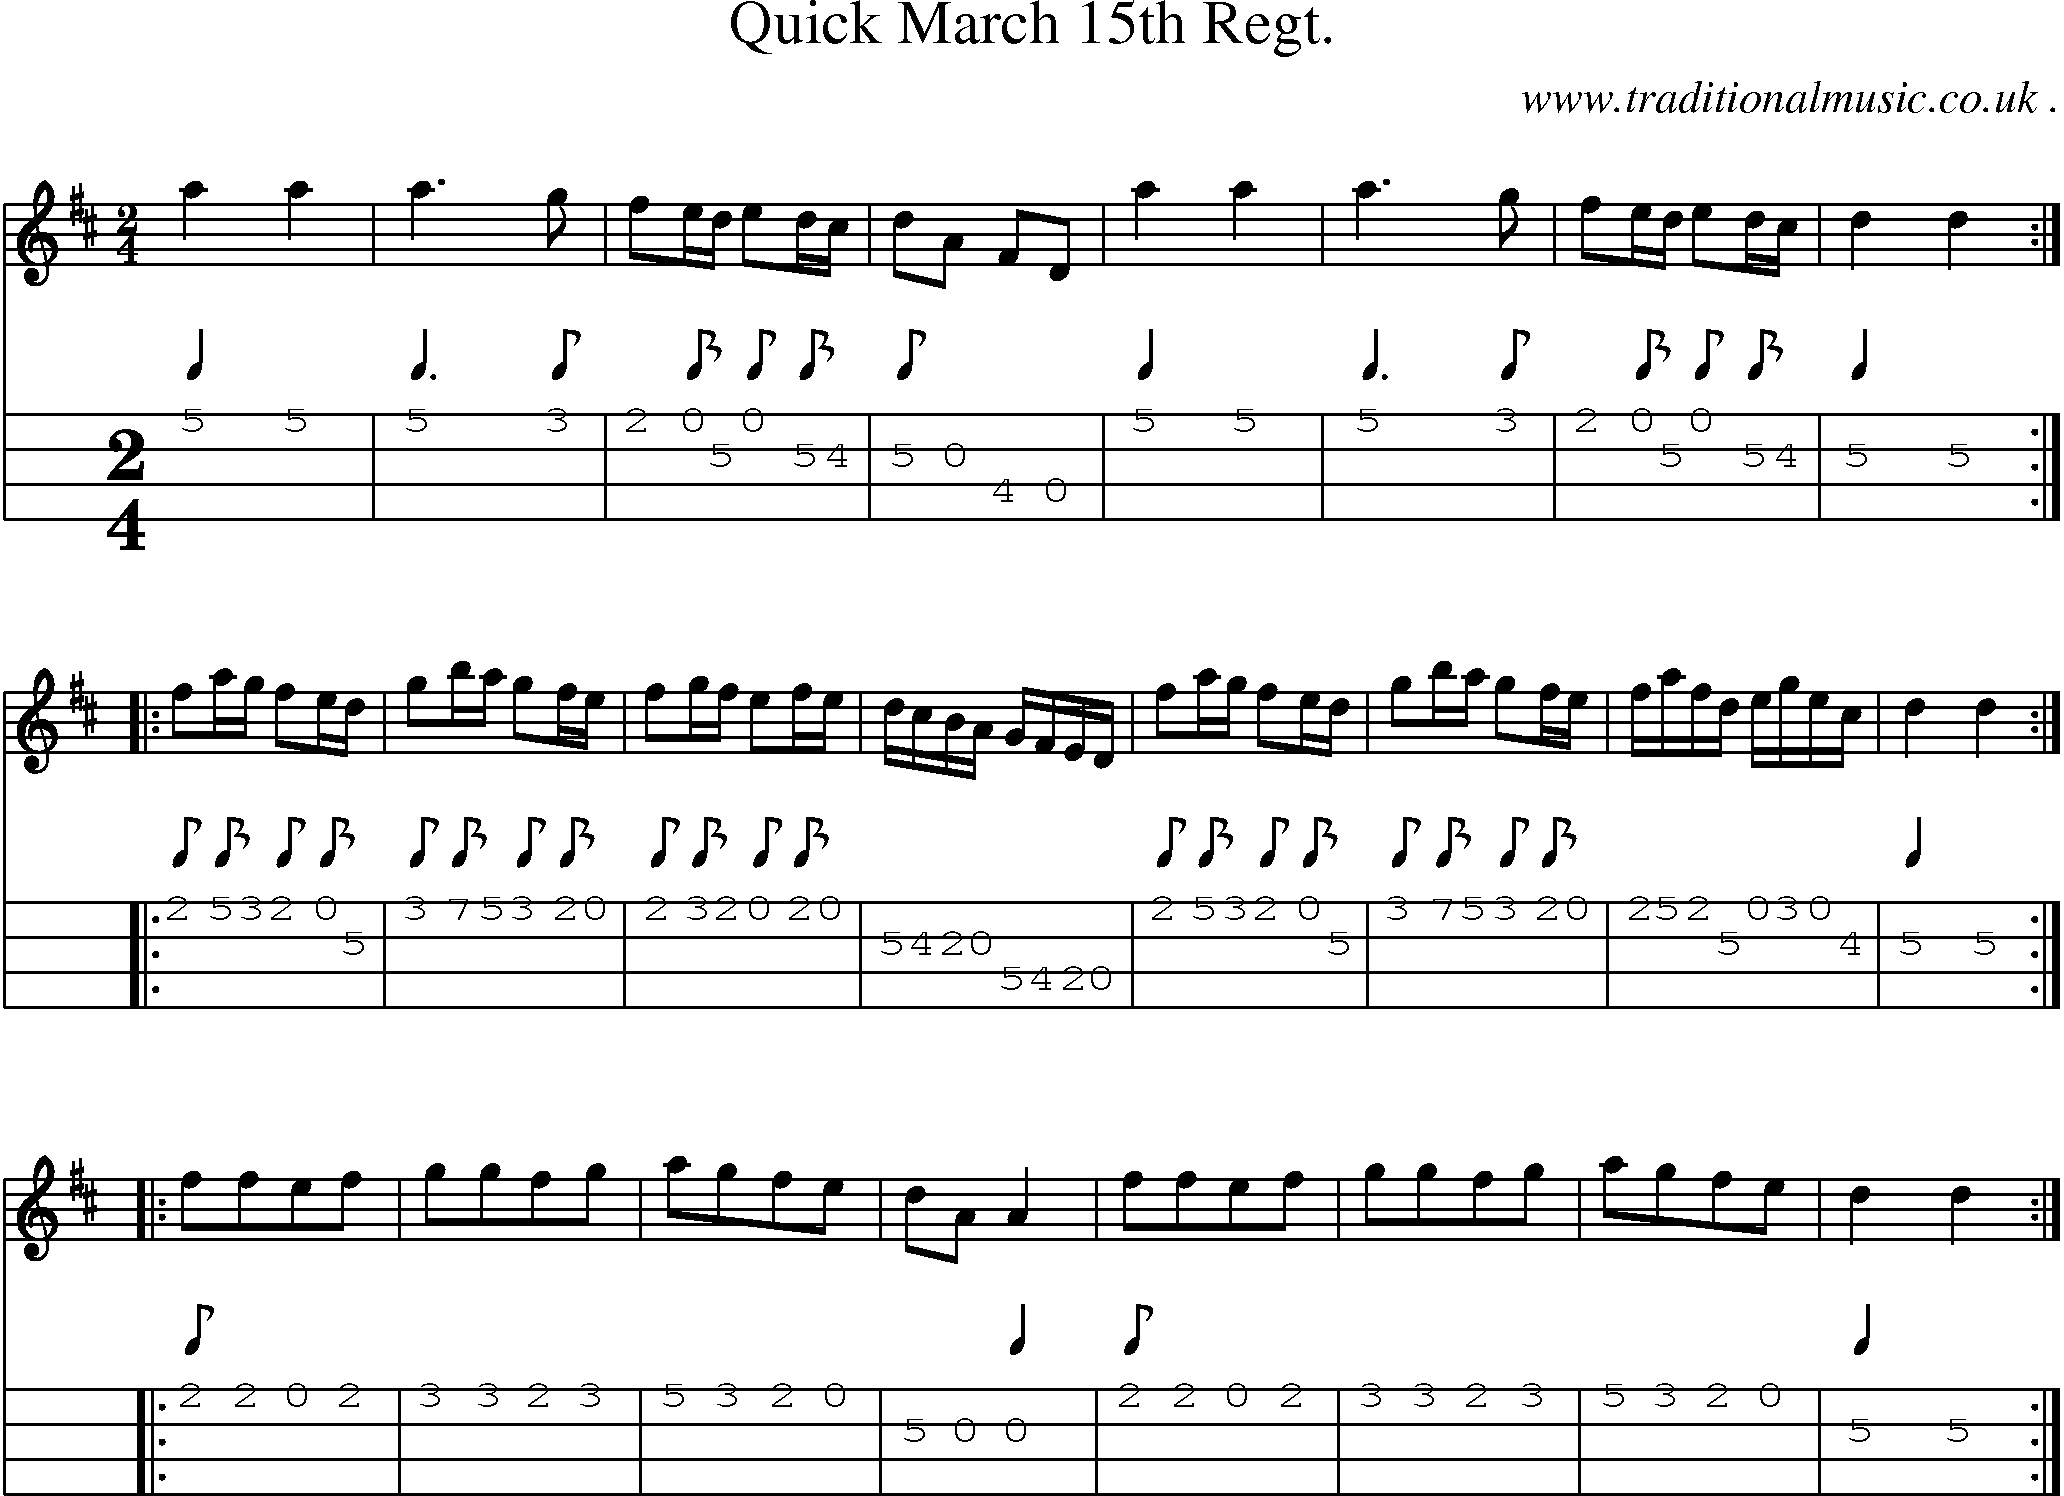 Sheet-music  score, Chords and Mandolin Tabs for Quick March 15th Regt